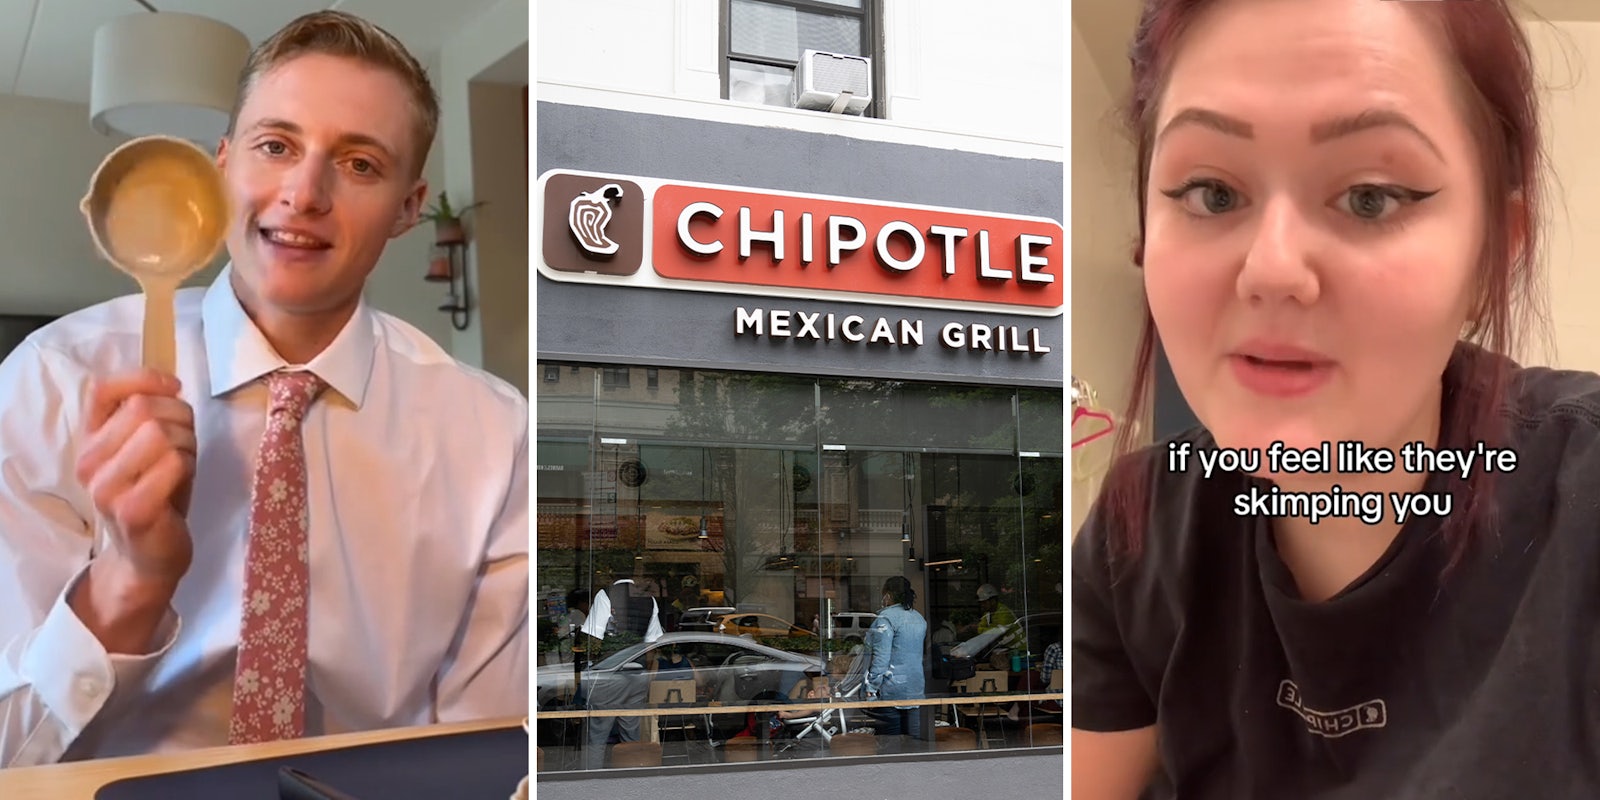 Chipotle worker reveals the reason why employees purposely ‘skimp you’ on